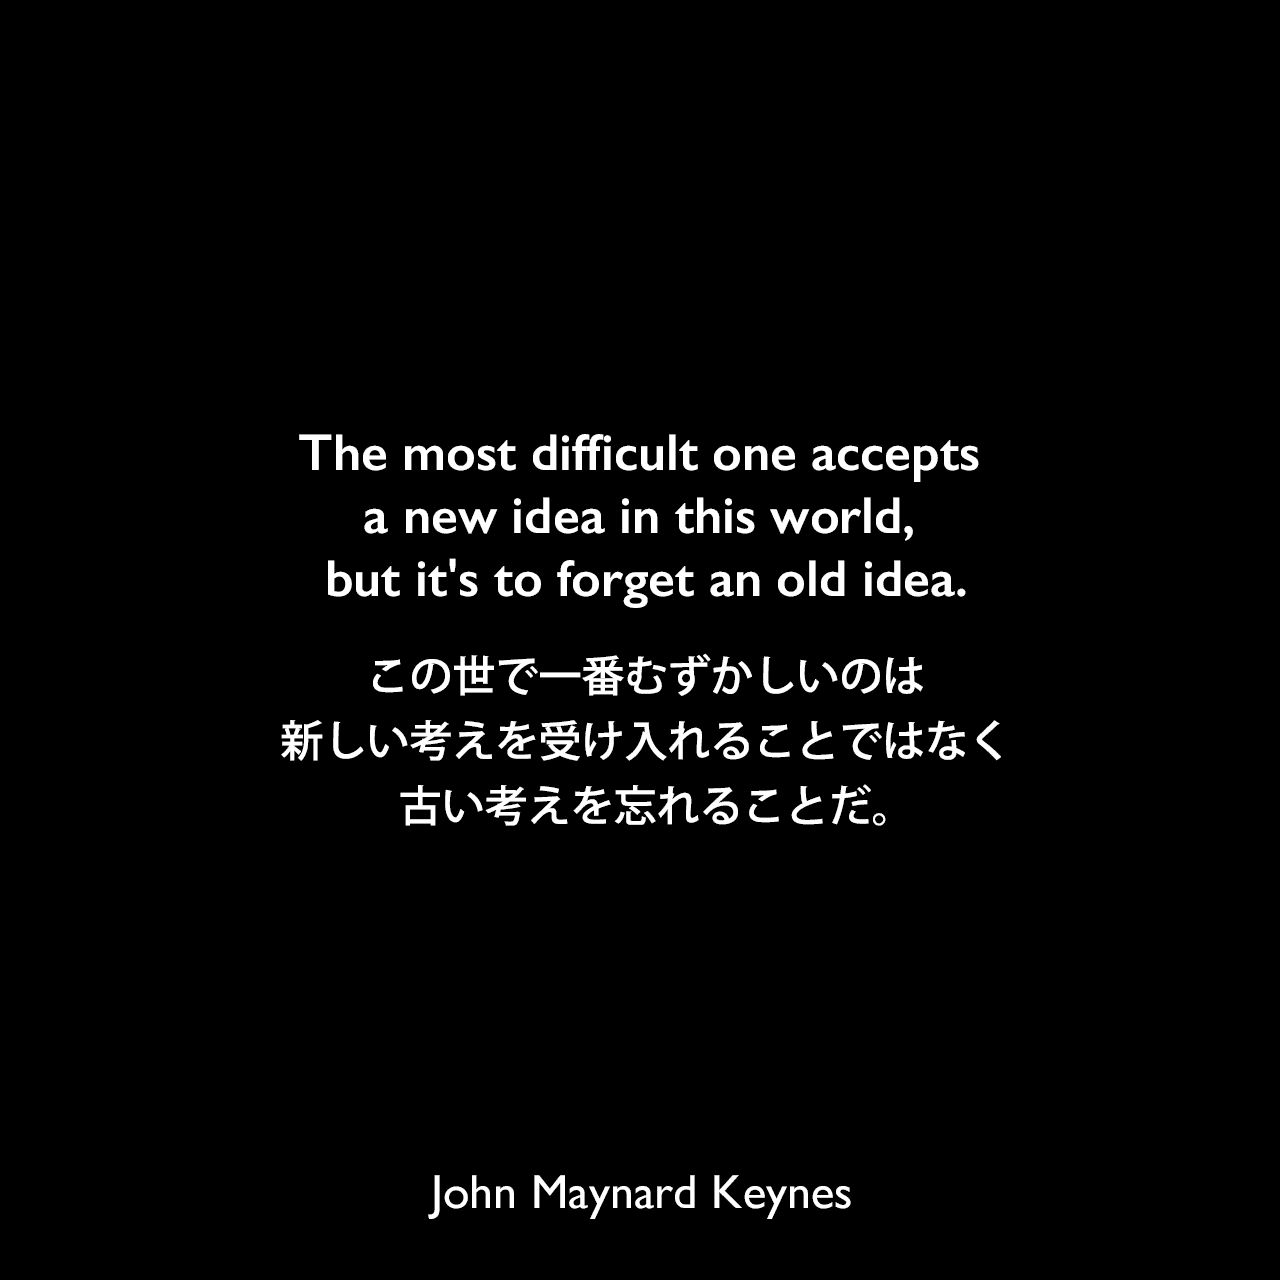 The most difficult one accepts a new idea in this world, but it's to forget an old idea.この世で一番むずかしいのは新しい考えを受け入れることではなく、古い考えを忘れることだ。John Maynard Keynes